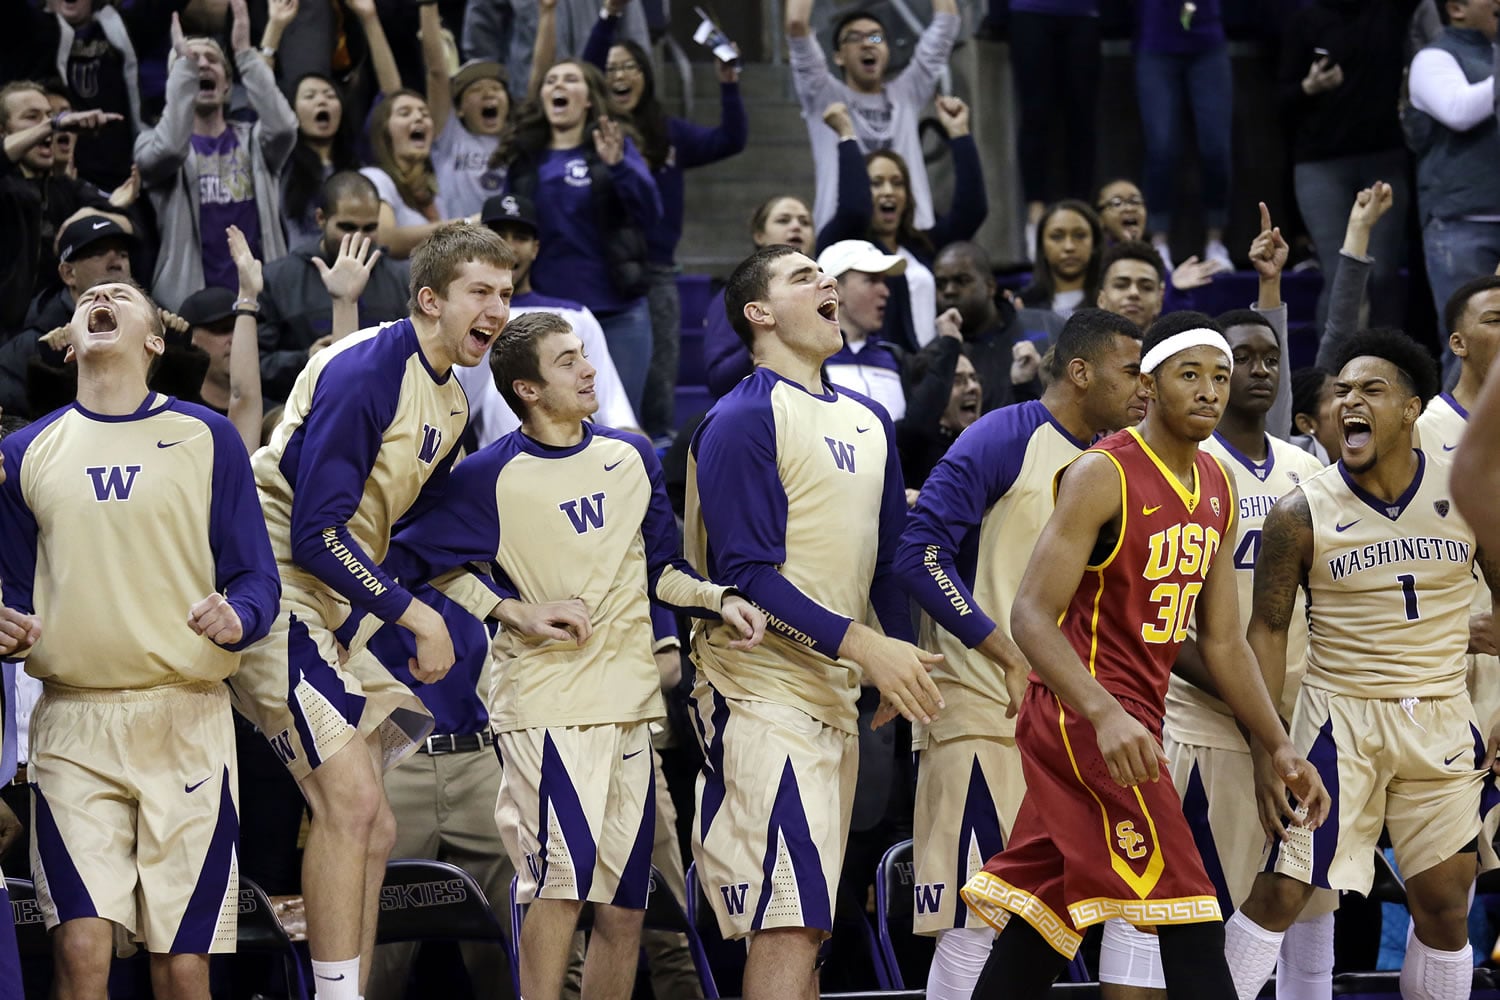 Players on the Washington bench erupt in cheers as Southern California's Elijah Stewart walks past on a scoring run by Washington late the second half of an NCAA college basketball game Sunday, Jan. 3, 2016, in Seattle. Washington won 87-85.